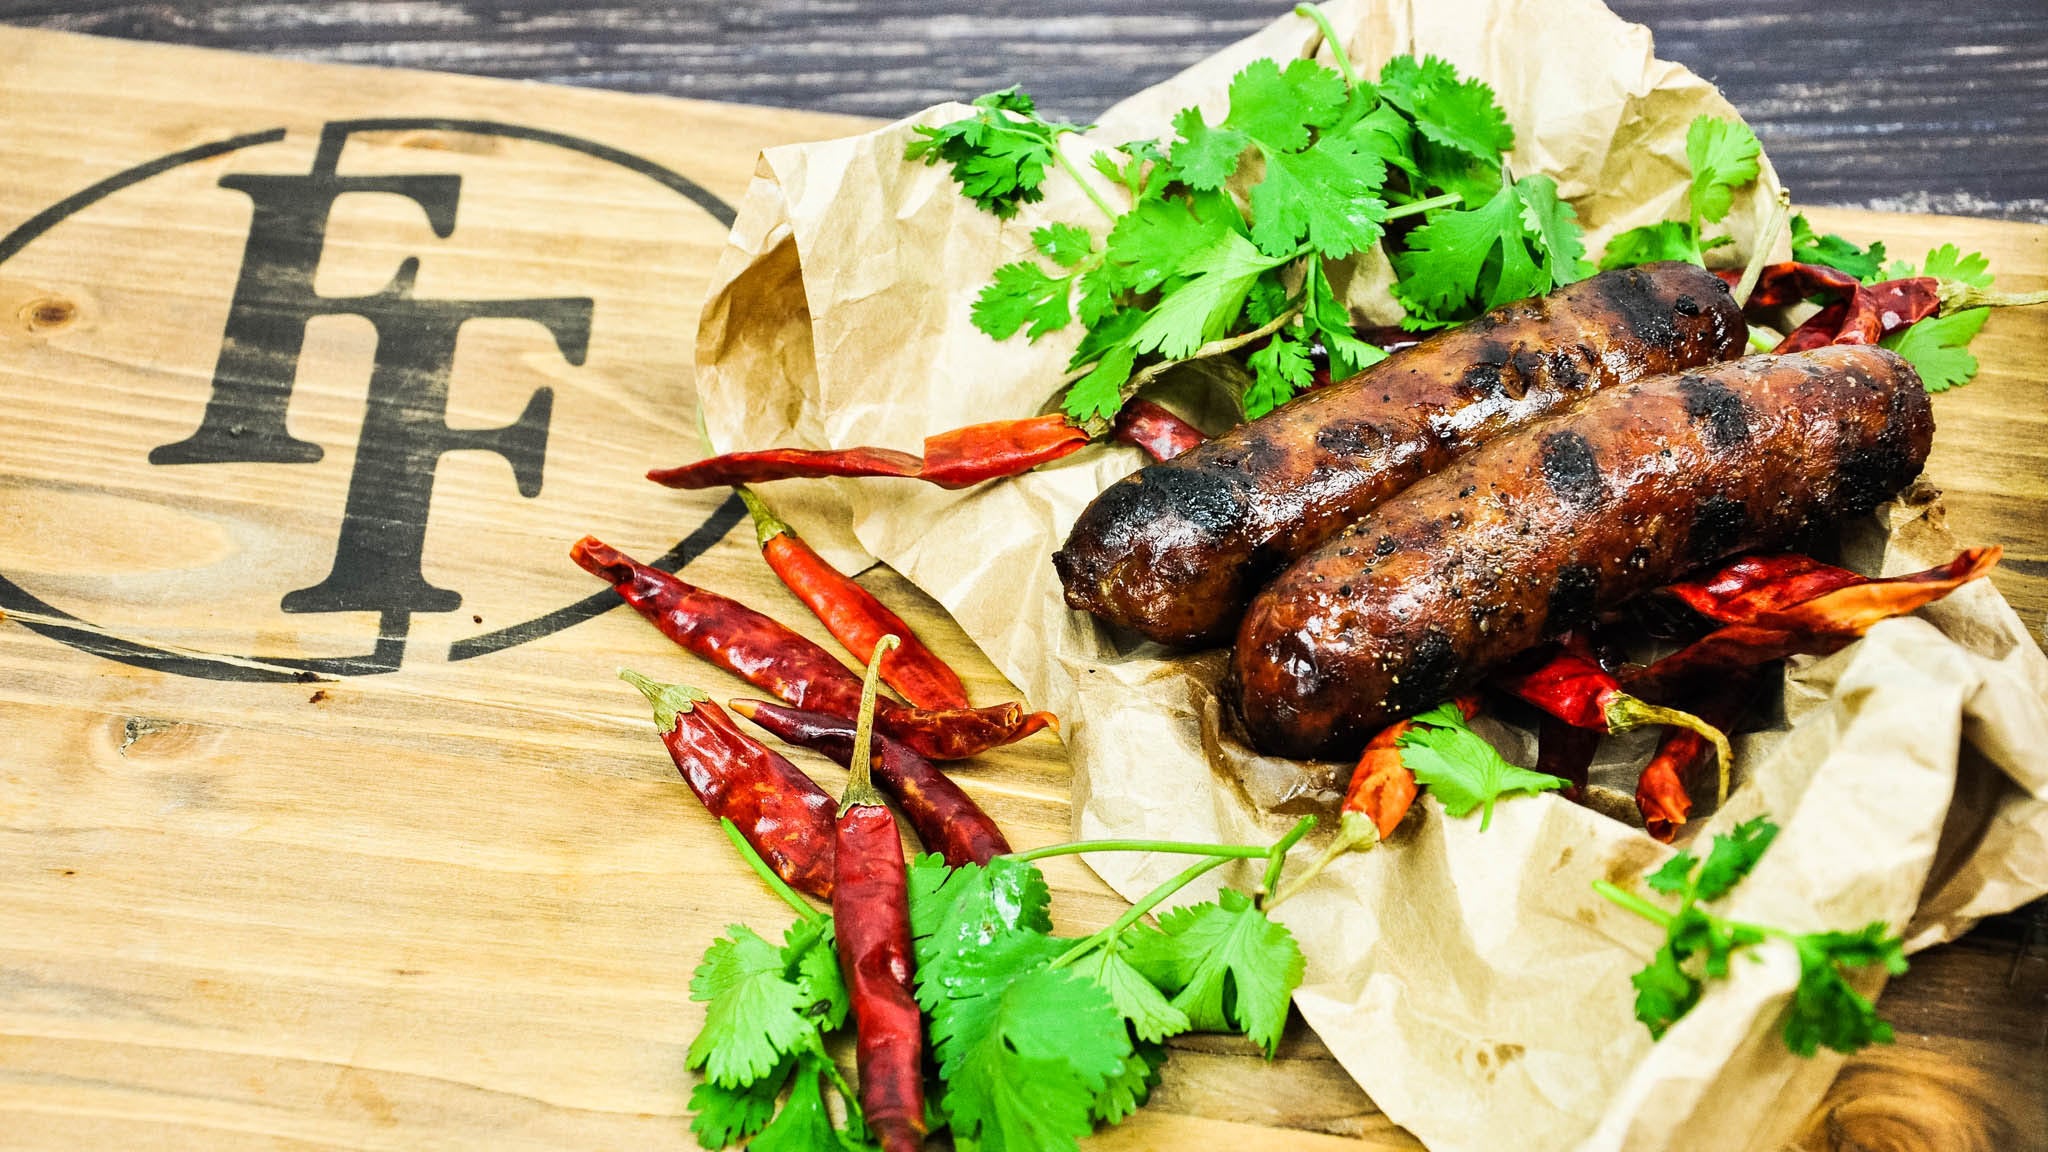 Bison Sausage with Chipotle Chilies Grilled